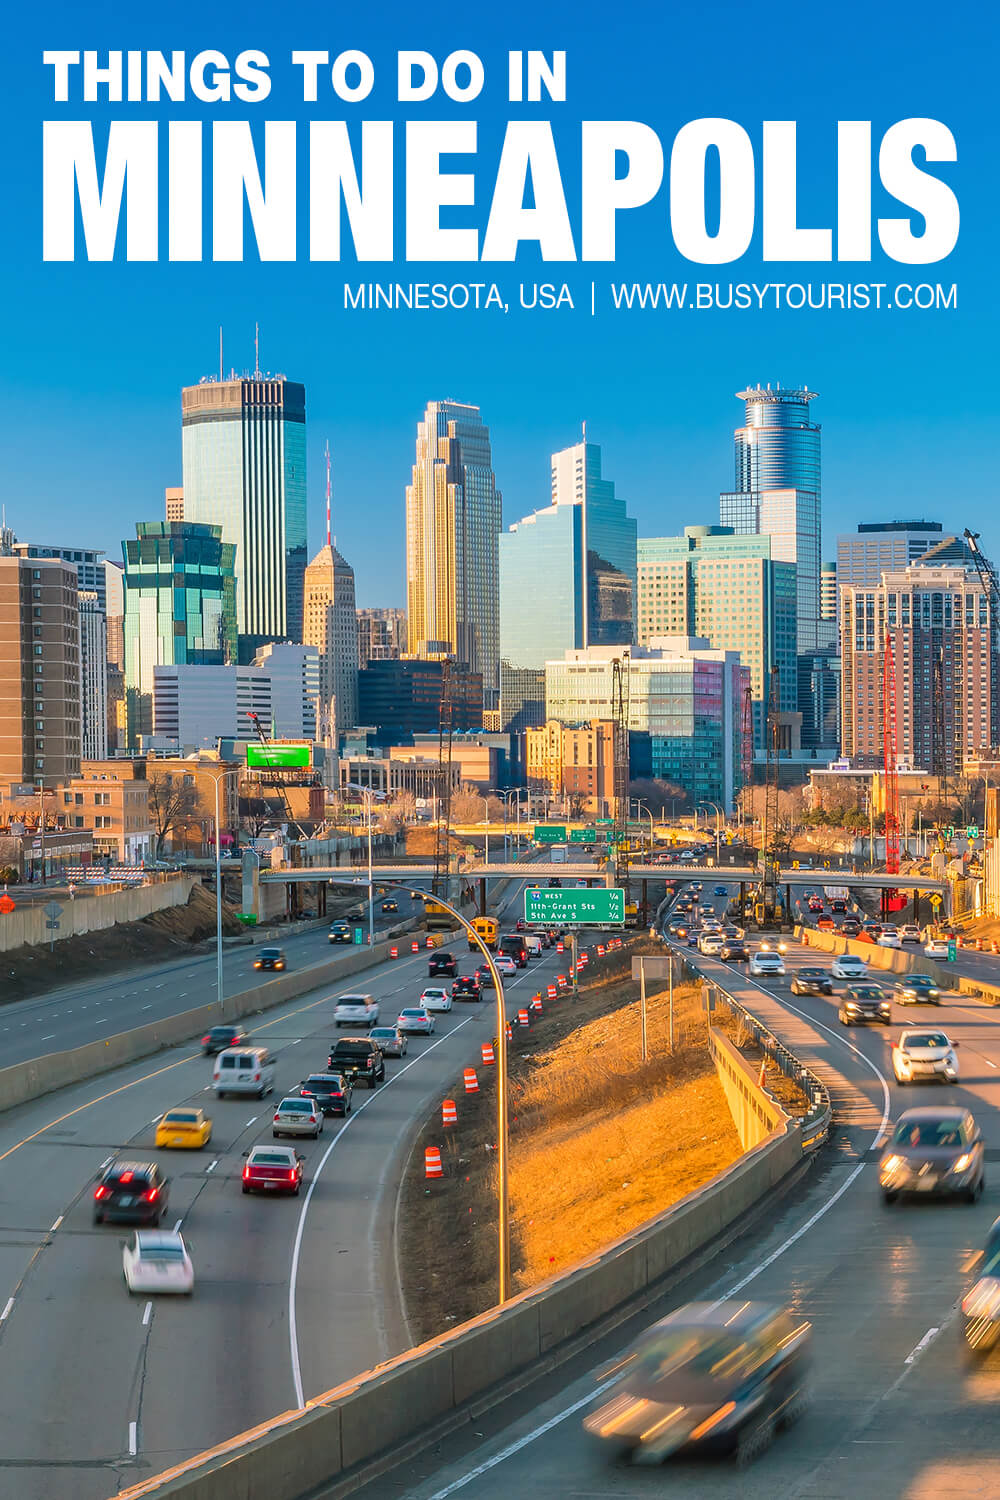 60 Best & Fun Things To Do In Minneapolis (MN) Attractions & Activities